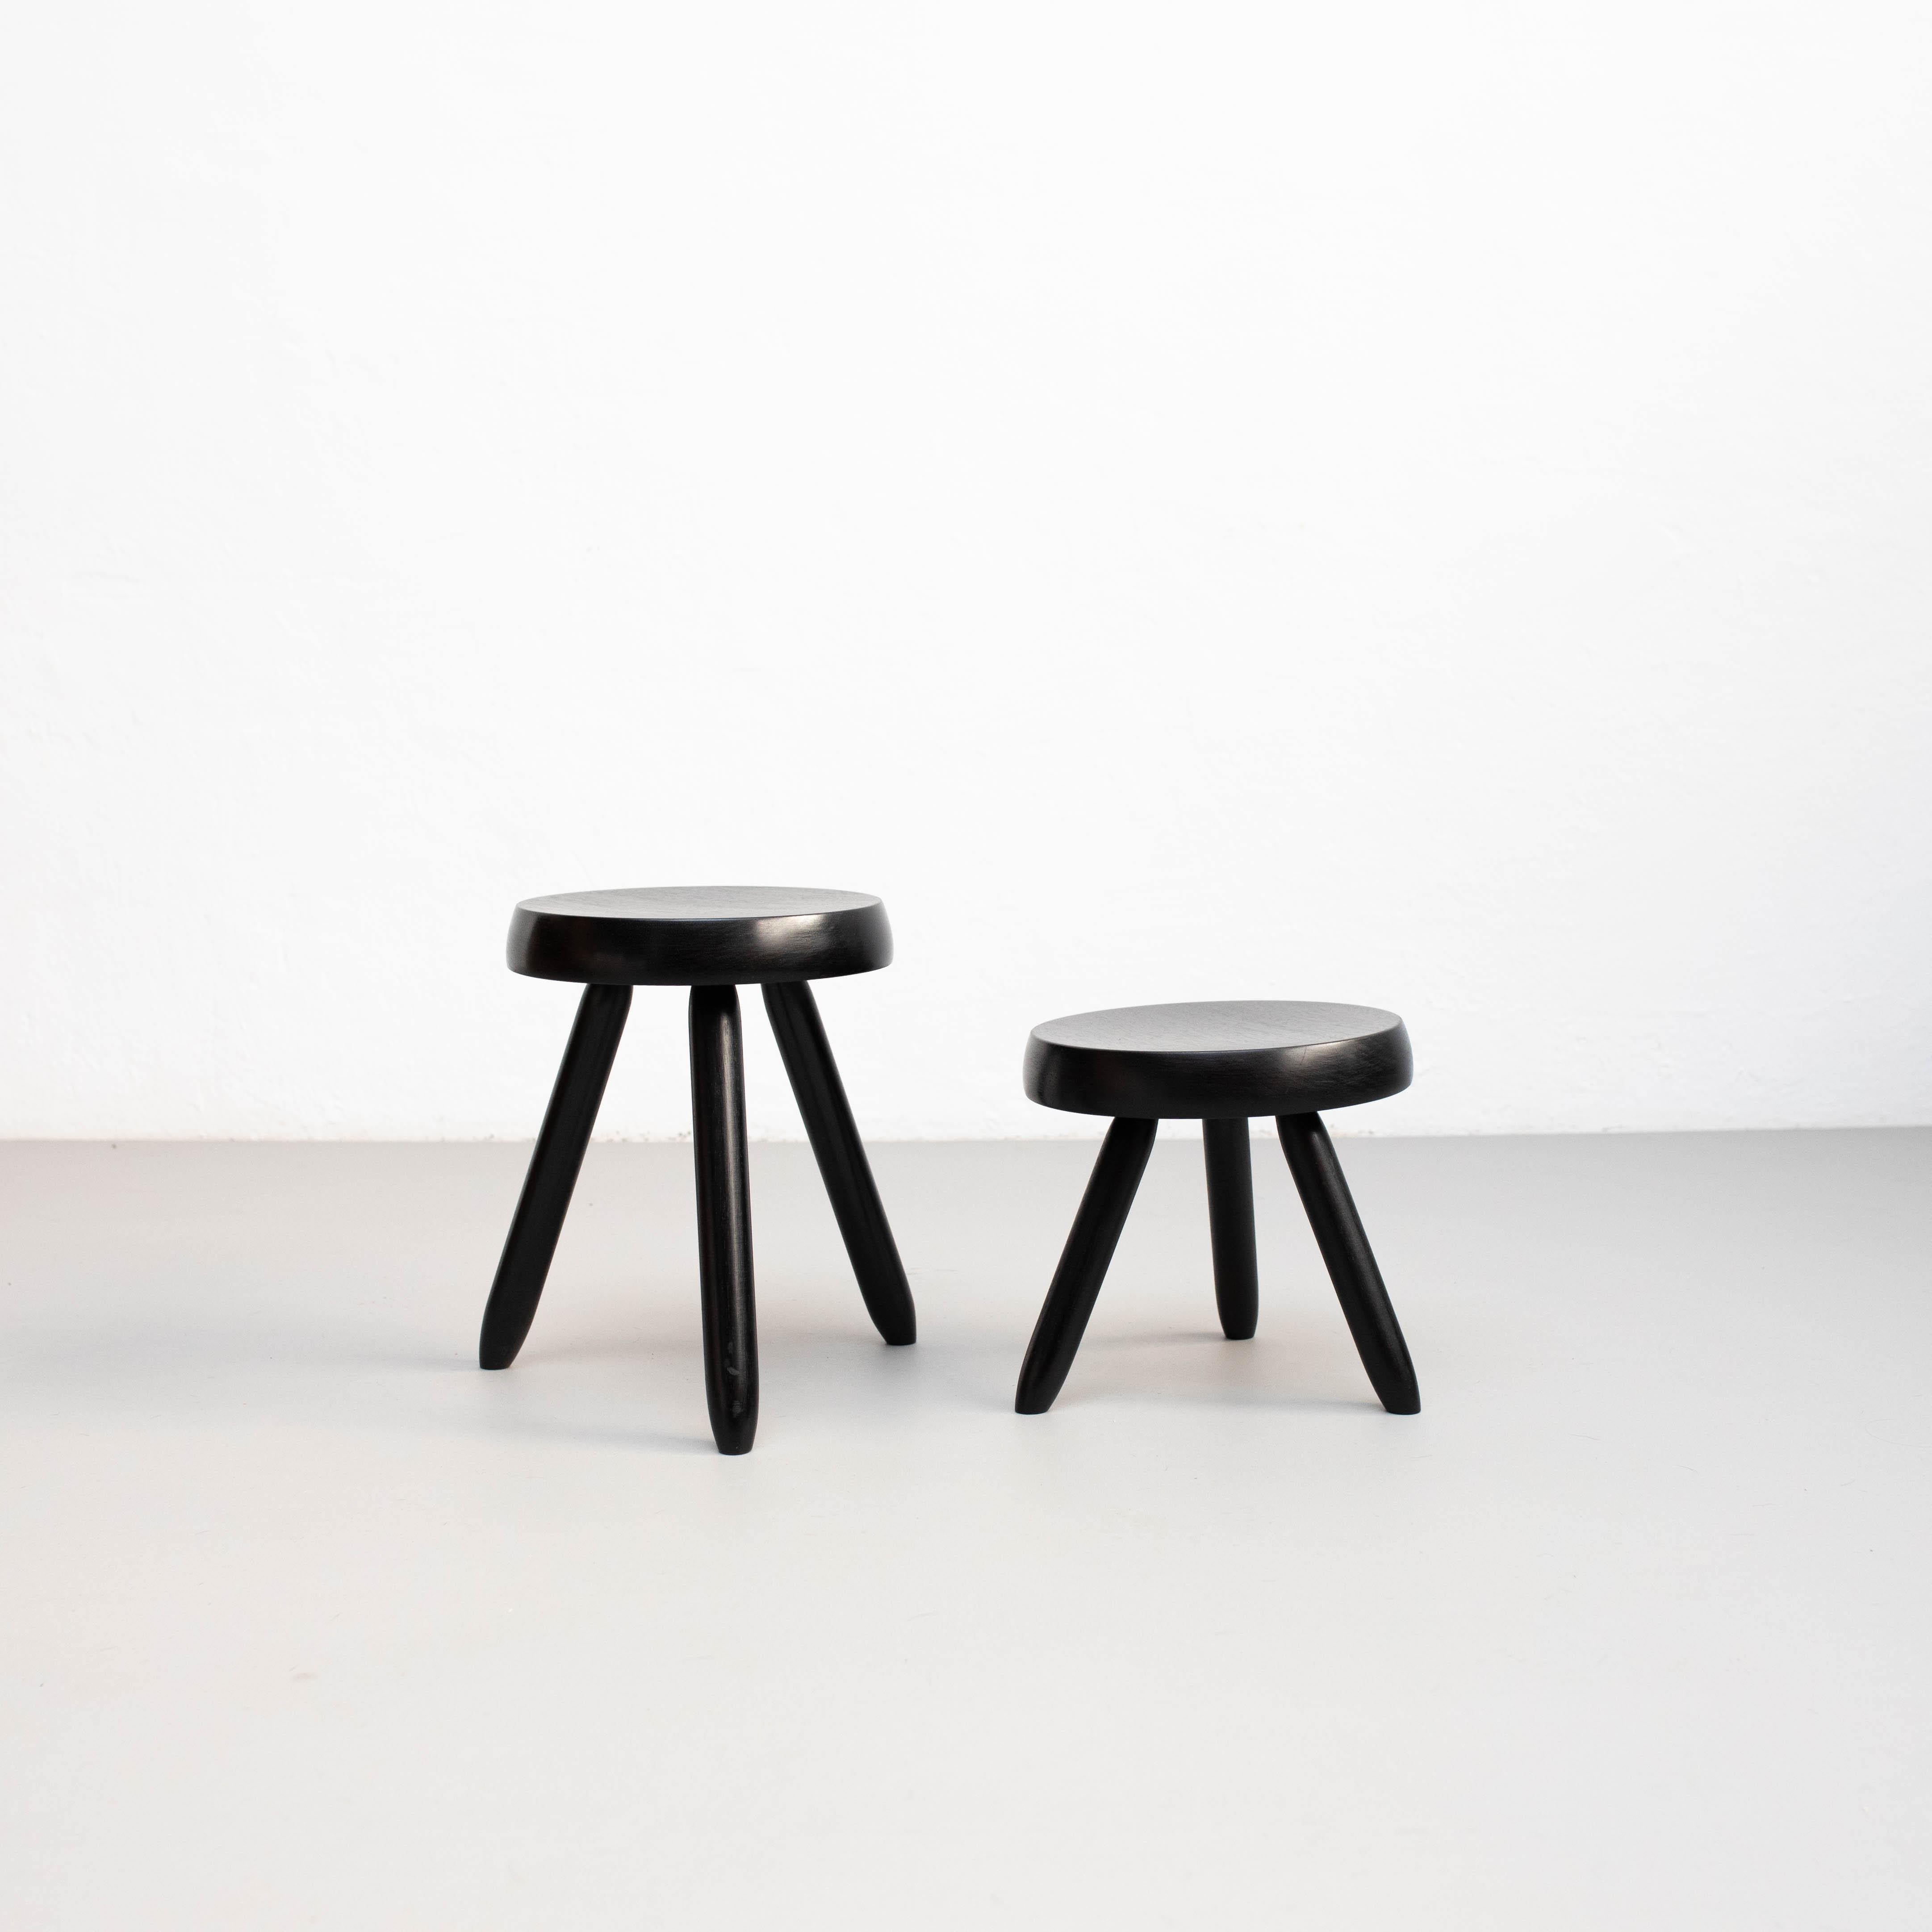 Stools designed in the style of Charlotte Perriand.
Made by unknown manufacturer.

In good original condition, preserving a beautiful patina, with minor wear consistent with age and use. 

Materials:
Wood

Dimensions:
1-                    2-
H 15.5